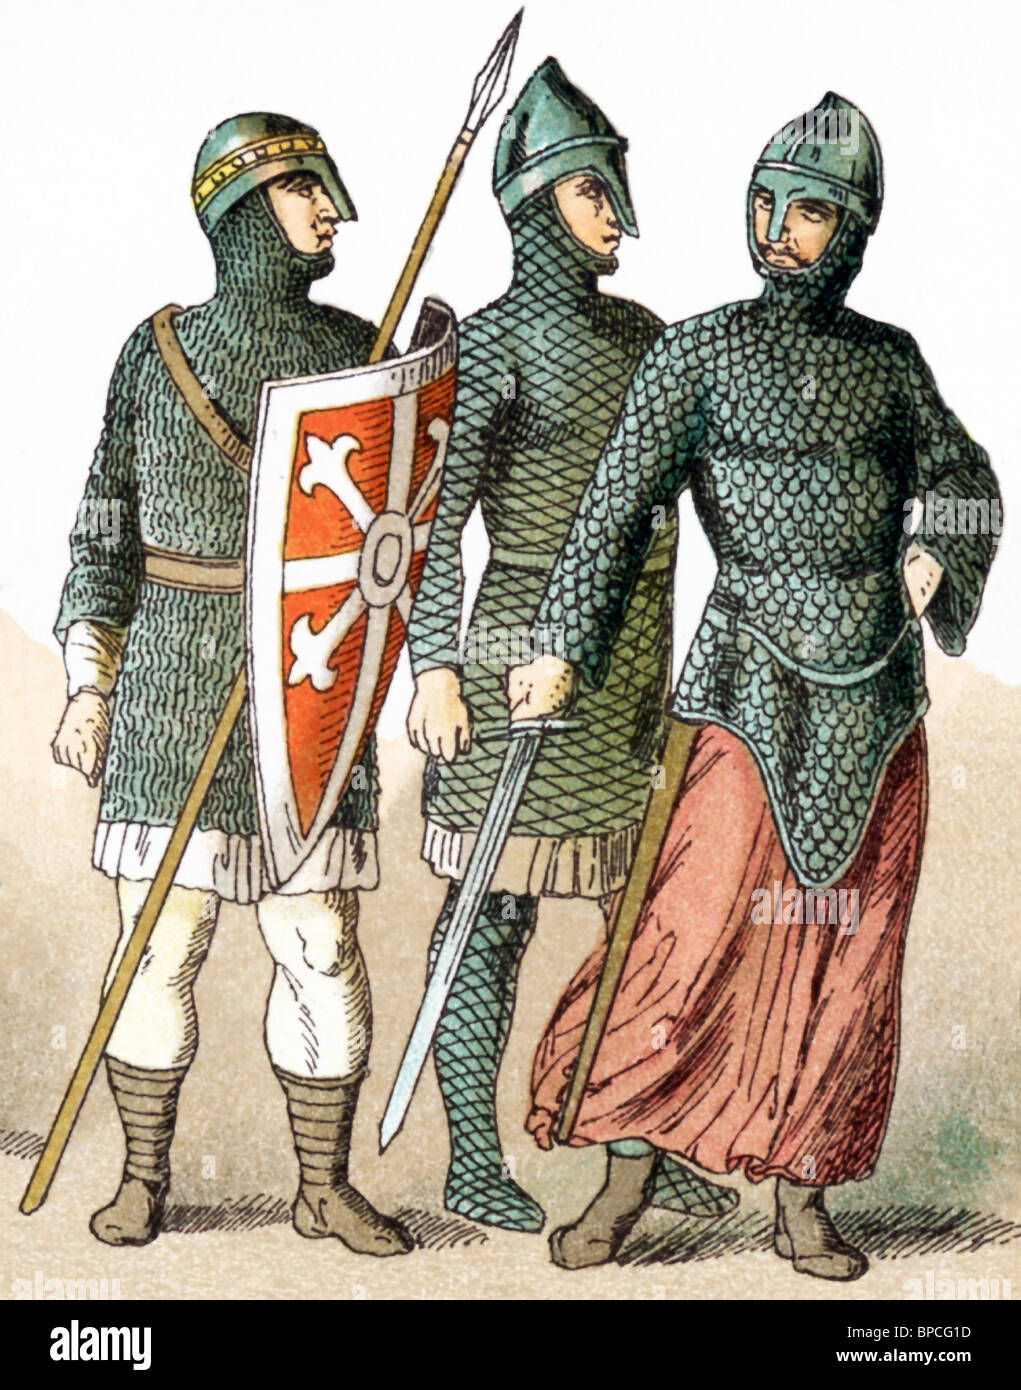 The figures represented here are Norman warriors between A.D. 1000 and 1100. Stock Photo